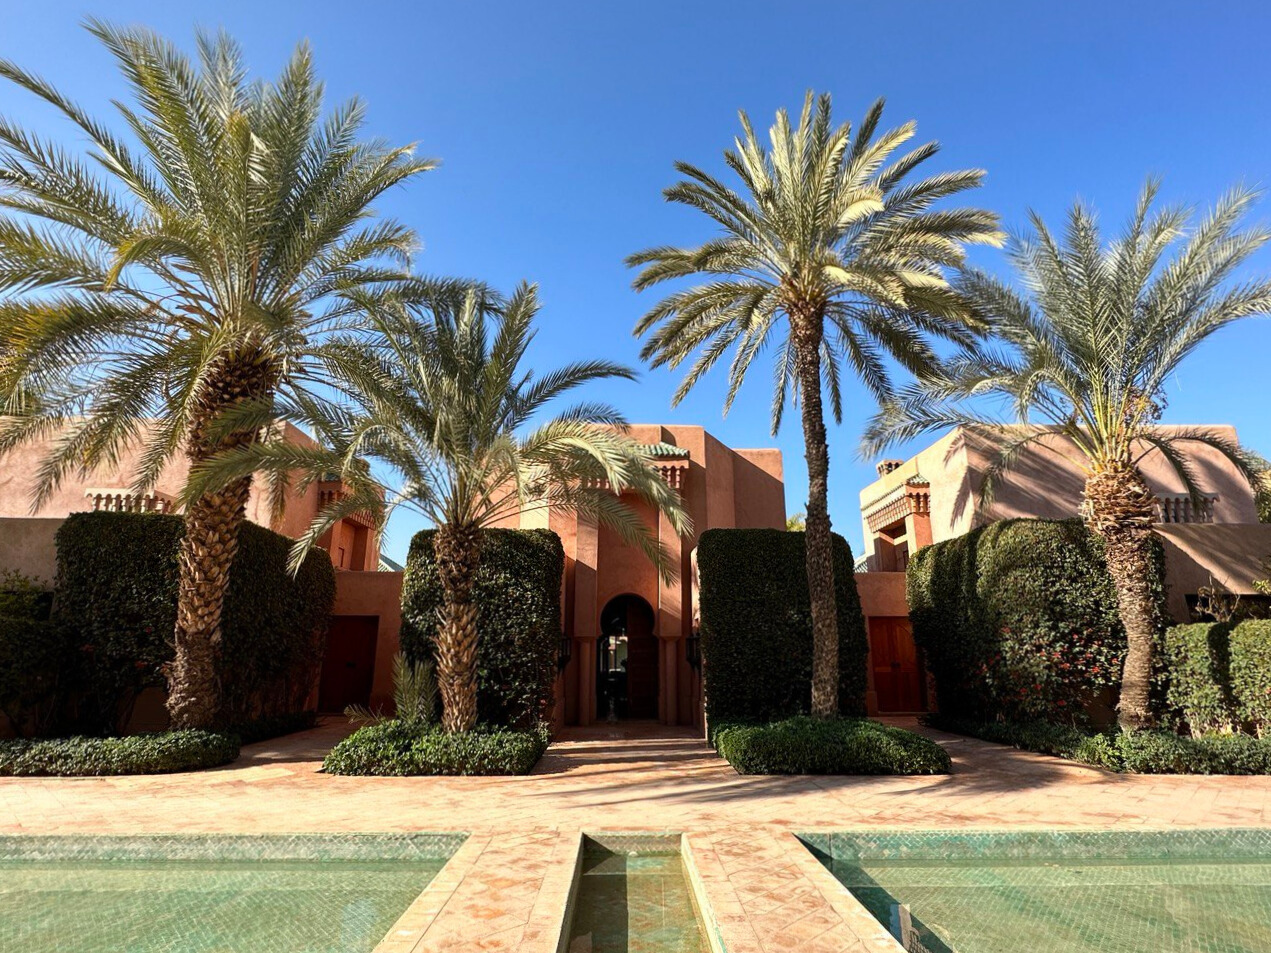 Designed by Ed Tuttle, Amanjena is a palatial paradise set at the heart of Marrakech, Morocco | Photos courtesy of Ria Prieto